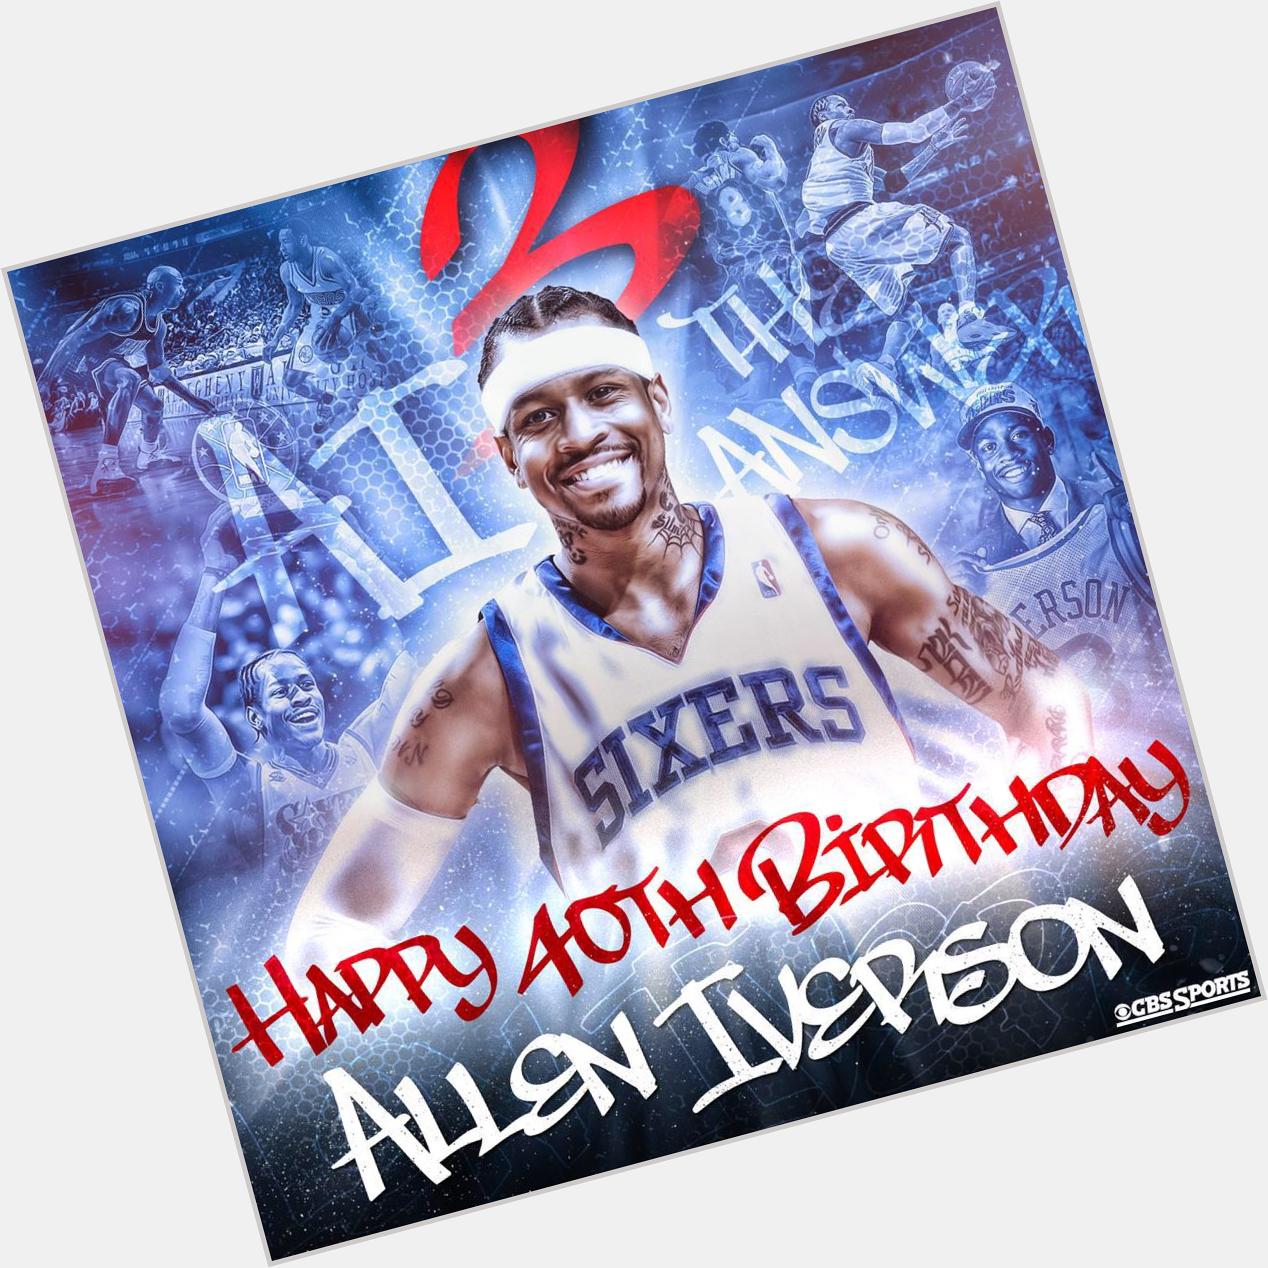 Happy 40th birthday to one of the most exciting players in NBA history, Allen Iverson.  